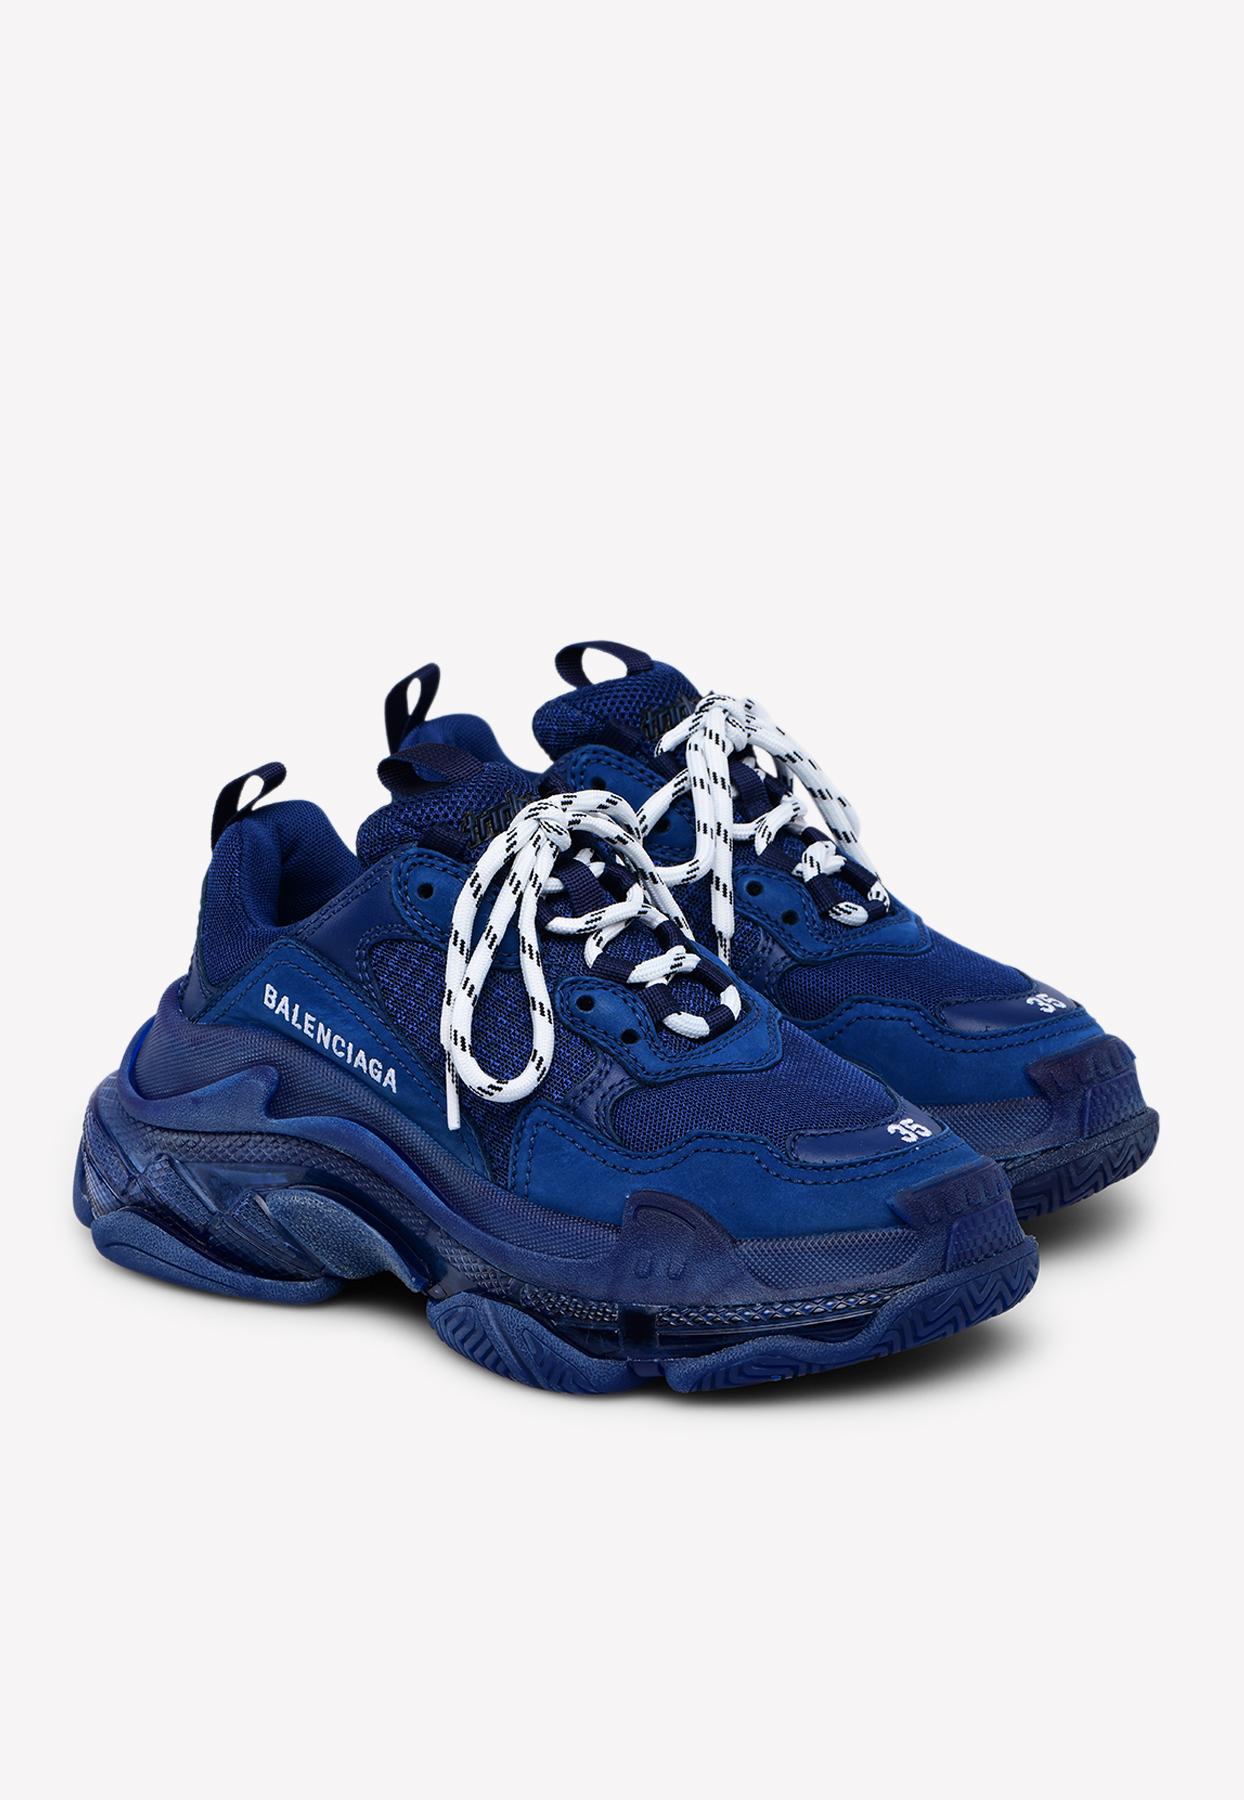 Balenciaga Triple S Airsole Leather And Mesh Trainers in Navy (Blue) - Save  48% - Lyst